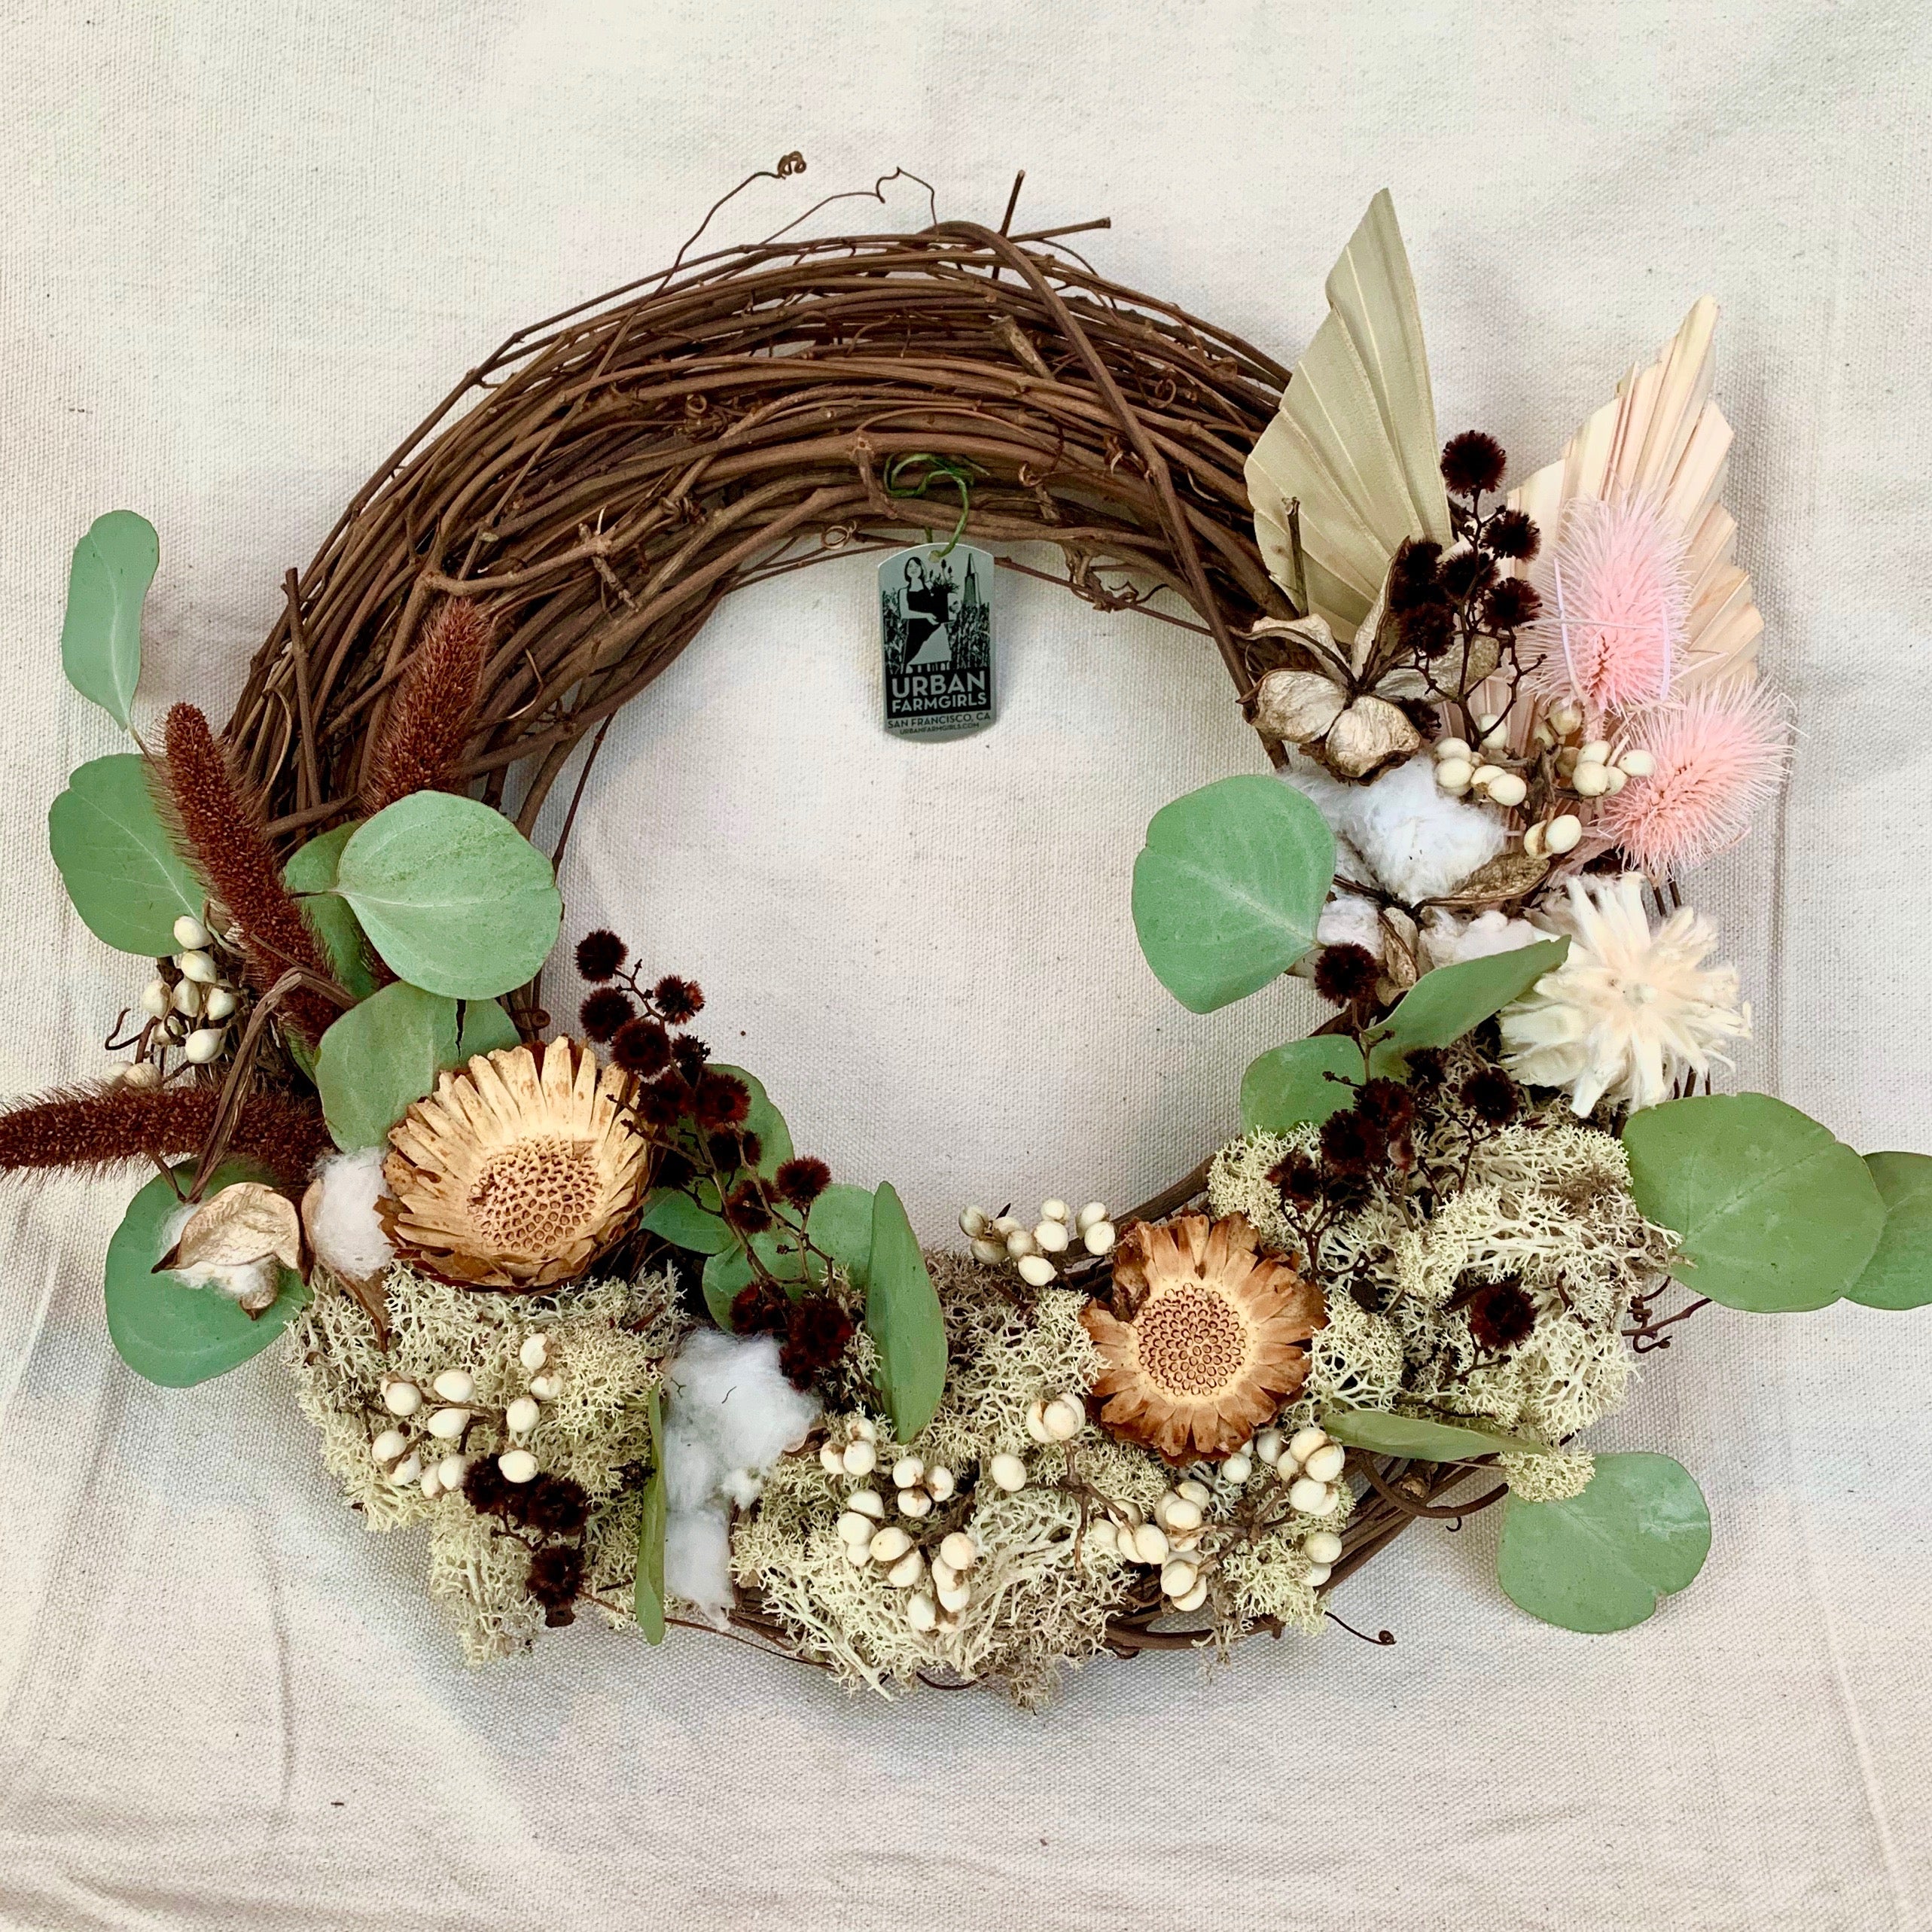 Inspired by crisp morning walks, this lightweight 12'' wreath combines dry elements of eucalyptus, tallow berries, foxtail reeds, palm fronds, and moss. The shades of green and bone with pops of pale yellow and pink create an elegant winter-bright design. Adorn your front door or anywhere in the home for any season.